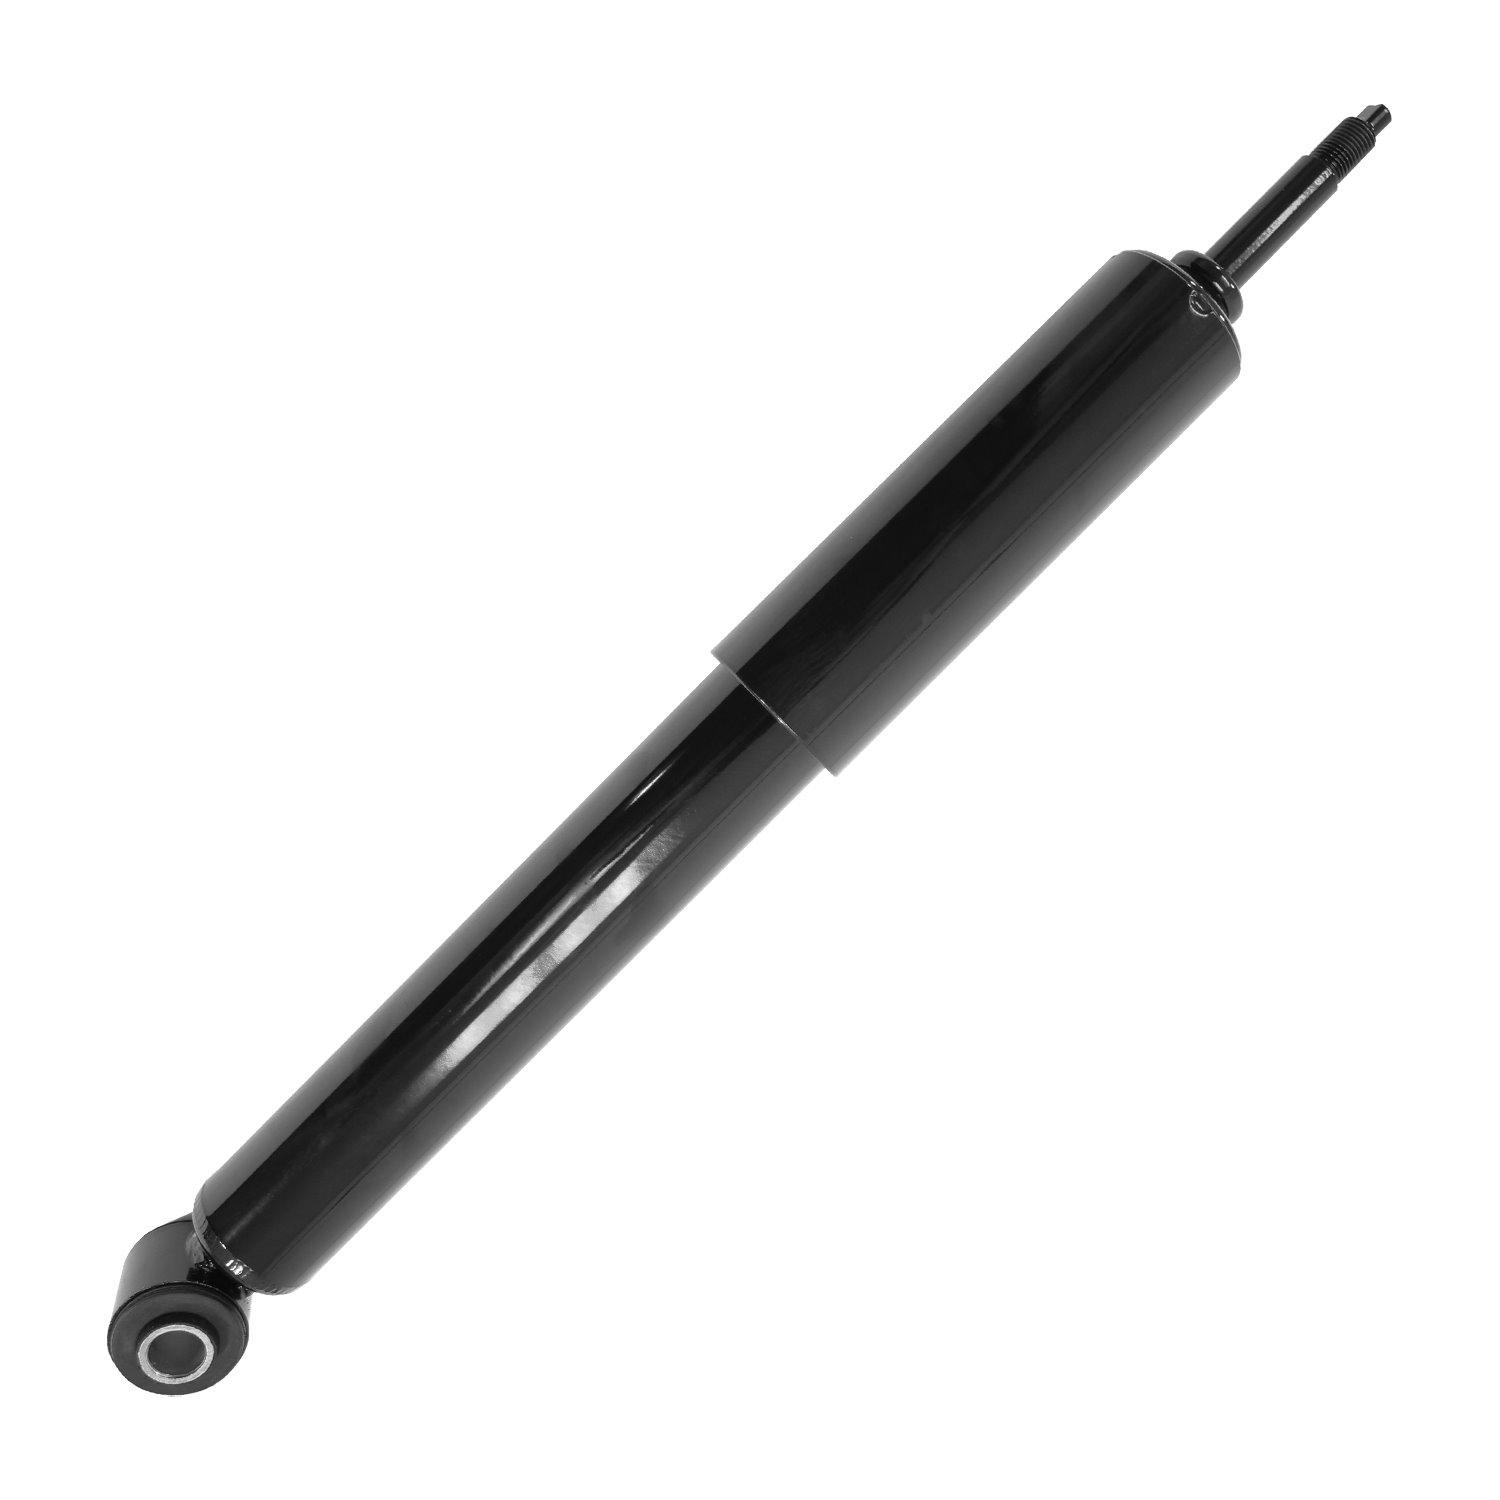 213220 Gas Charged Shock Absorber Fits Select Dodge Ram 1500